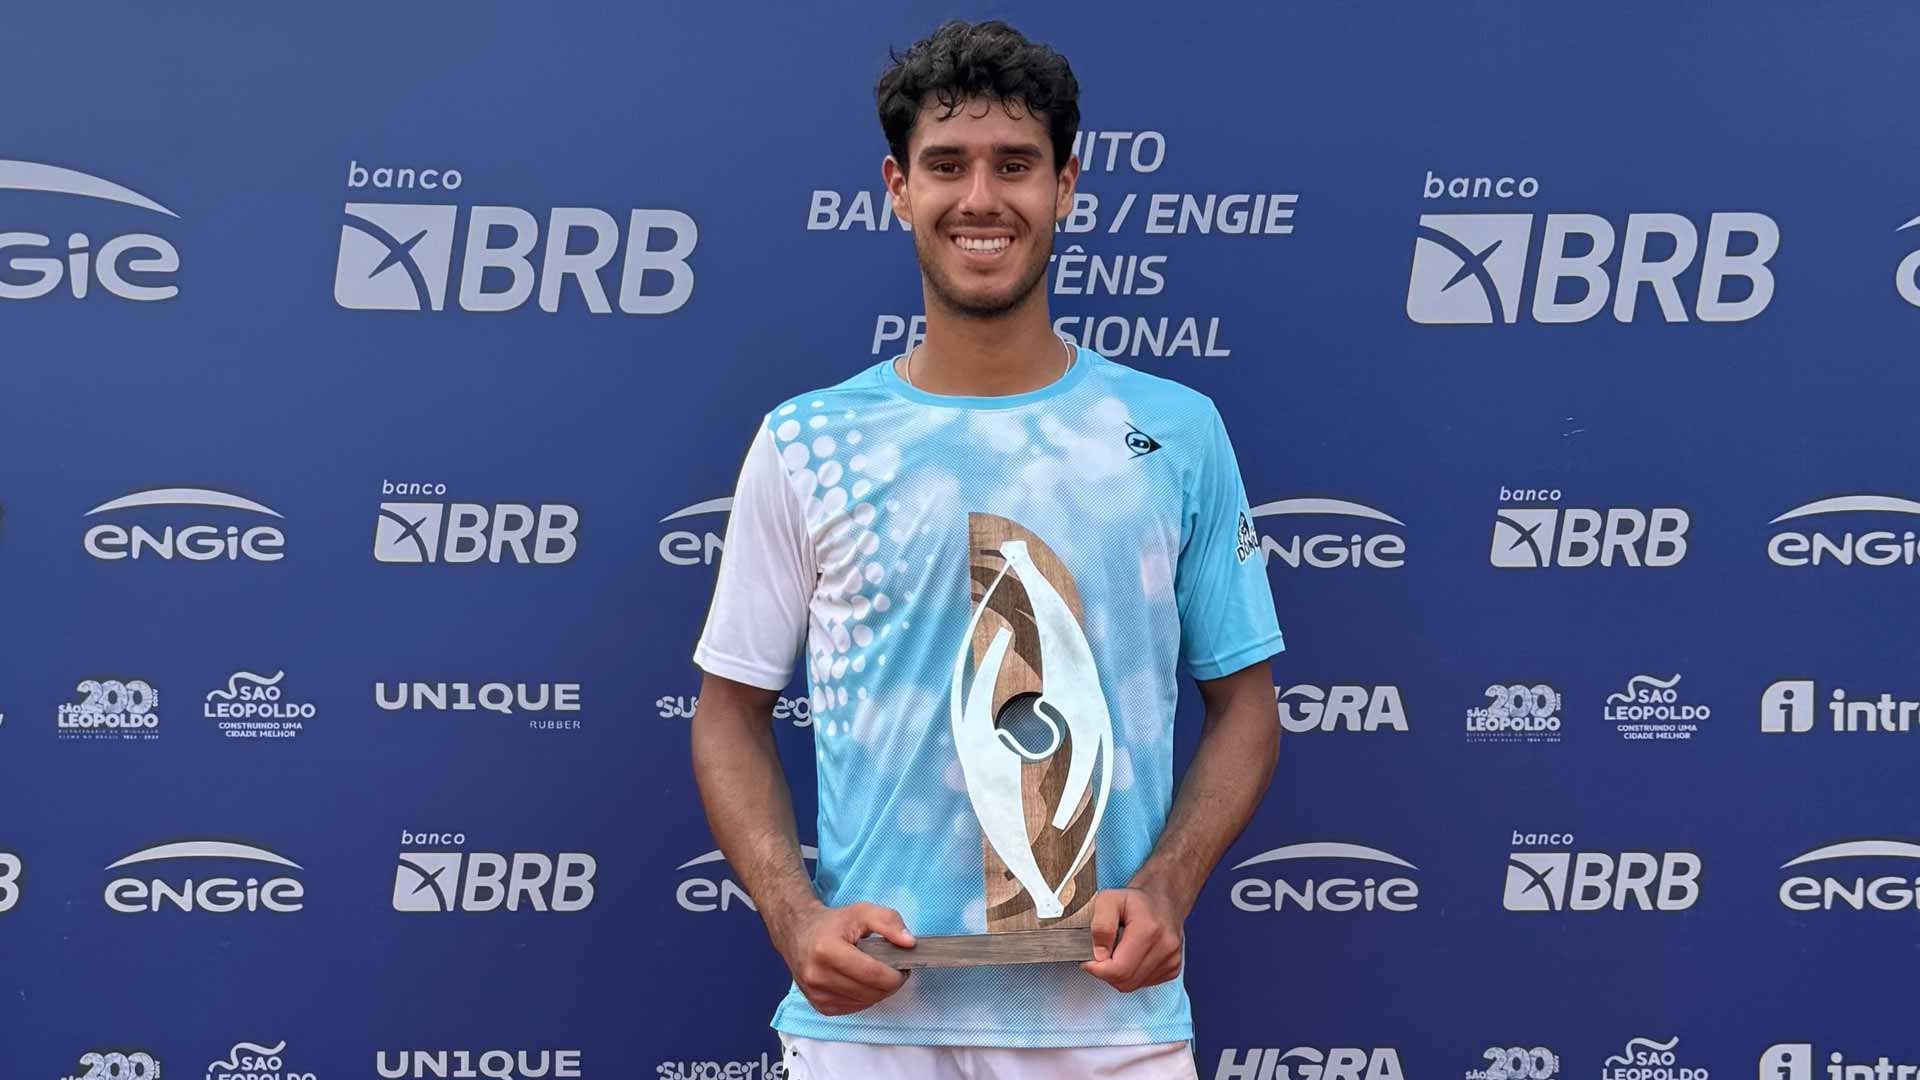 Adolfo Daniel Vallejo is crowned champion at the Sao Leopoldo Challenger.